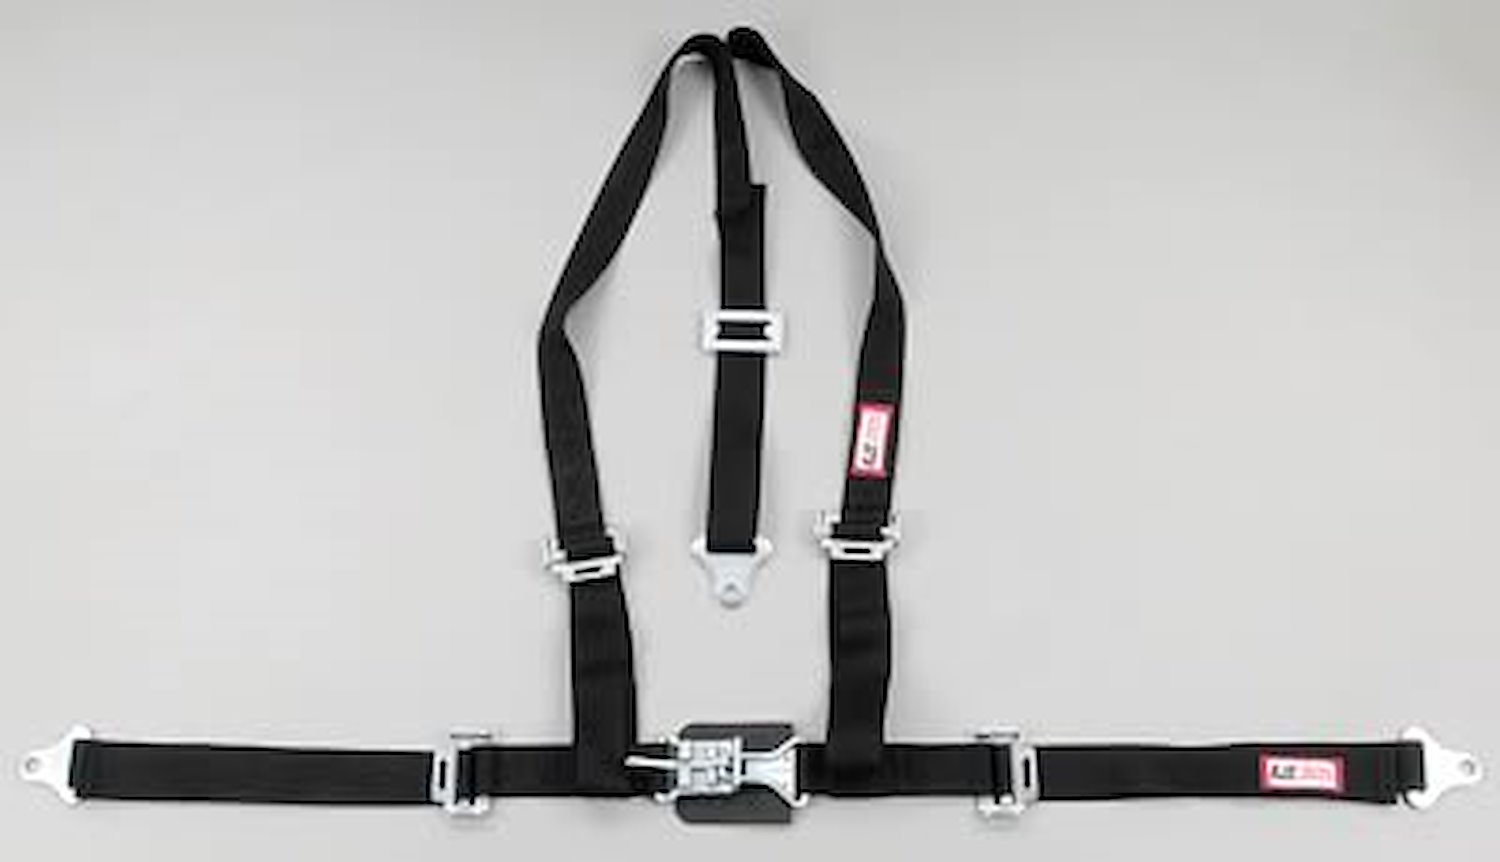 NON-SFI L&L HARNESS 3 PULL UP Lap Belt SEWN IN 2 S.H. Individual ROLL BAR Mount w/STERNUM STRAP ALL WRAP ENDS BLACK